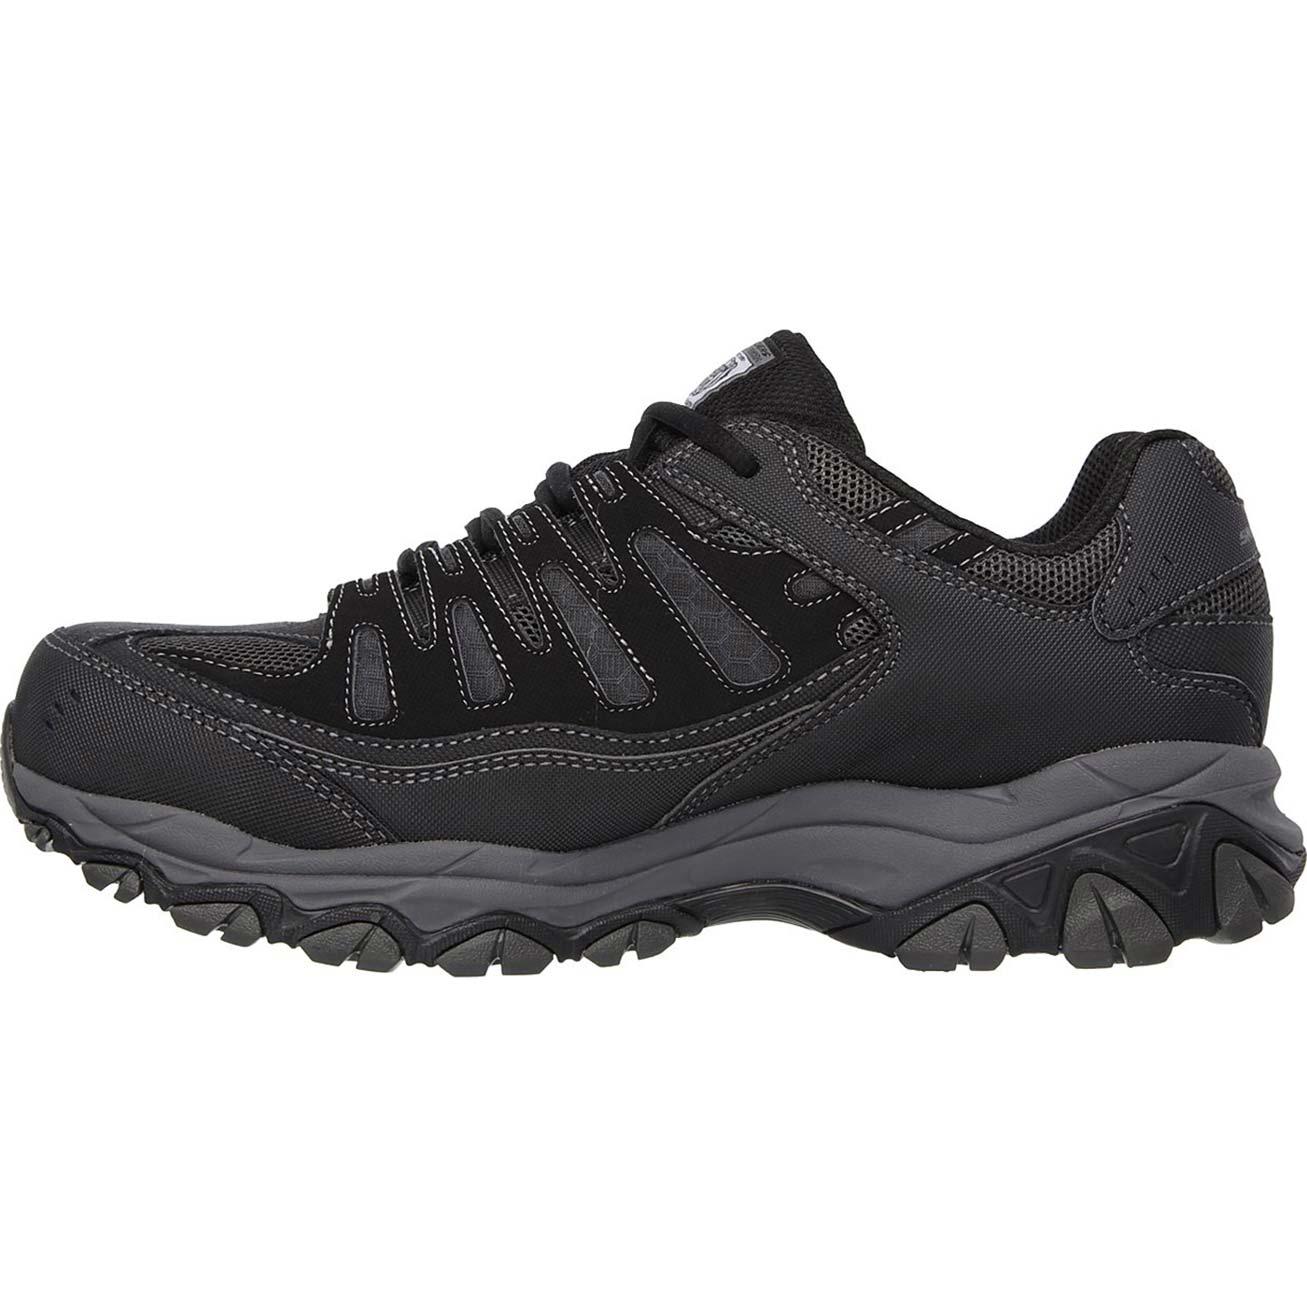 SKECHERS Work Relaxed Fit Cankton Steel Toe Work Athletic Shoe, 77055BKCC